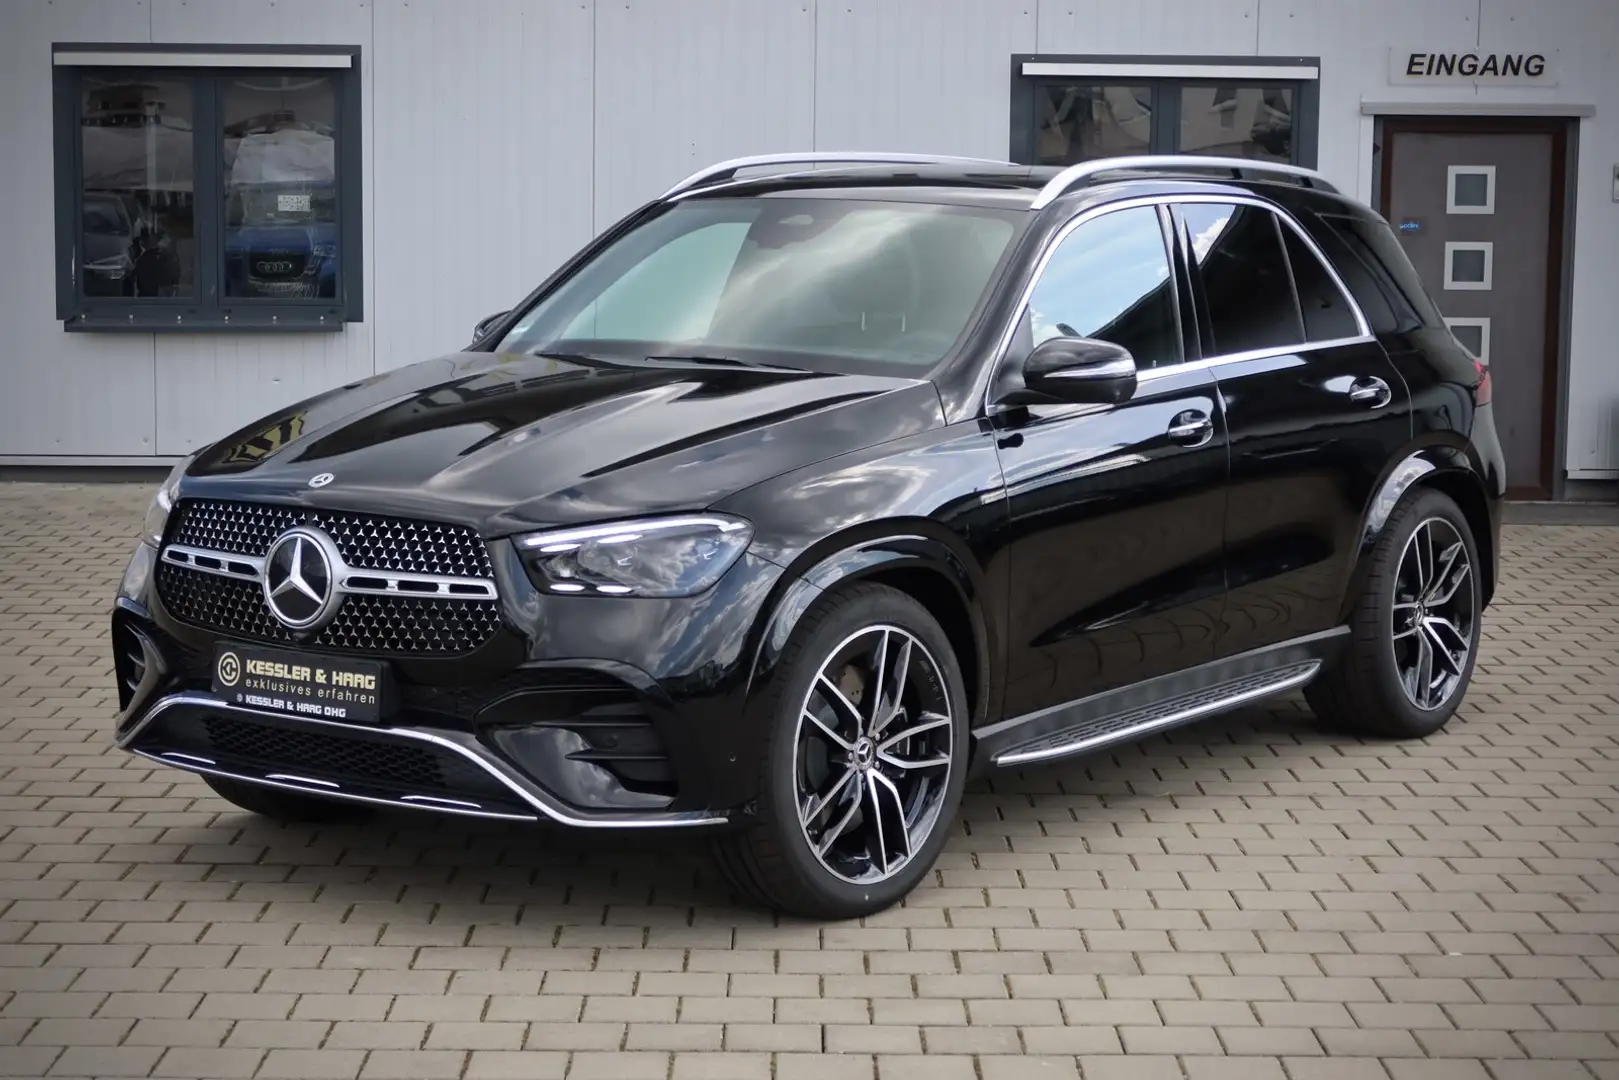 Mercedes-Benz GLE 450 4Matic AMG Line #PANO#AIRMATIC#FACELIFT# Black - 2